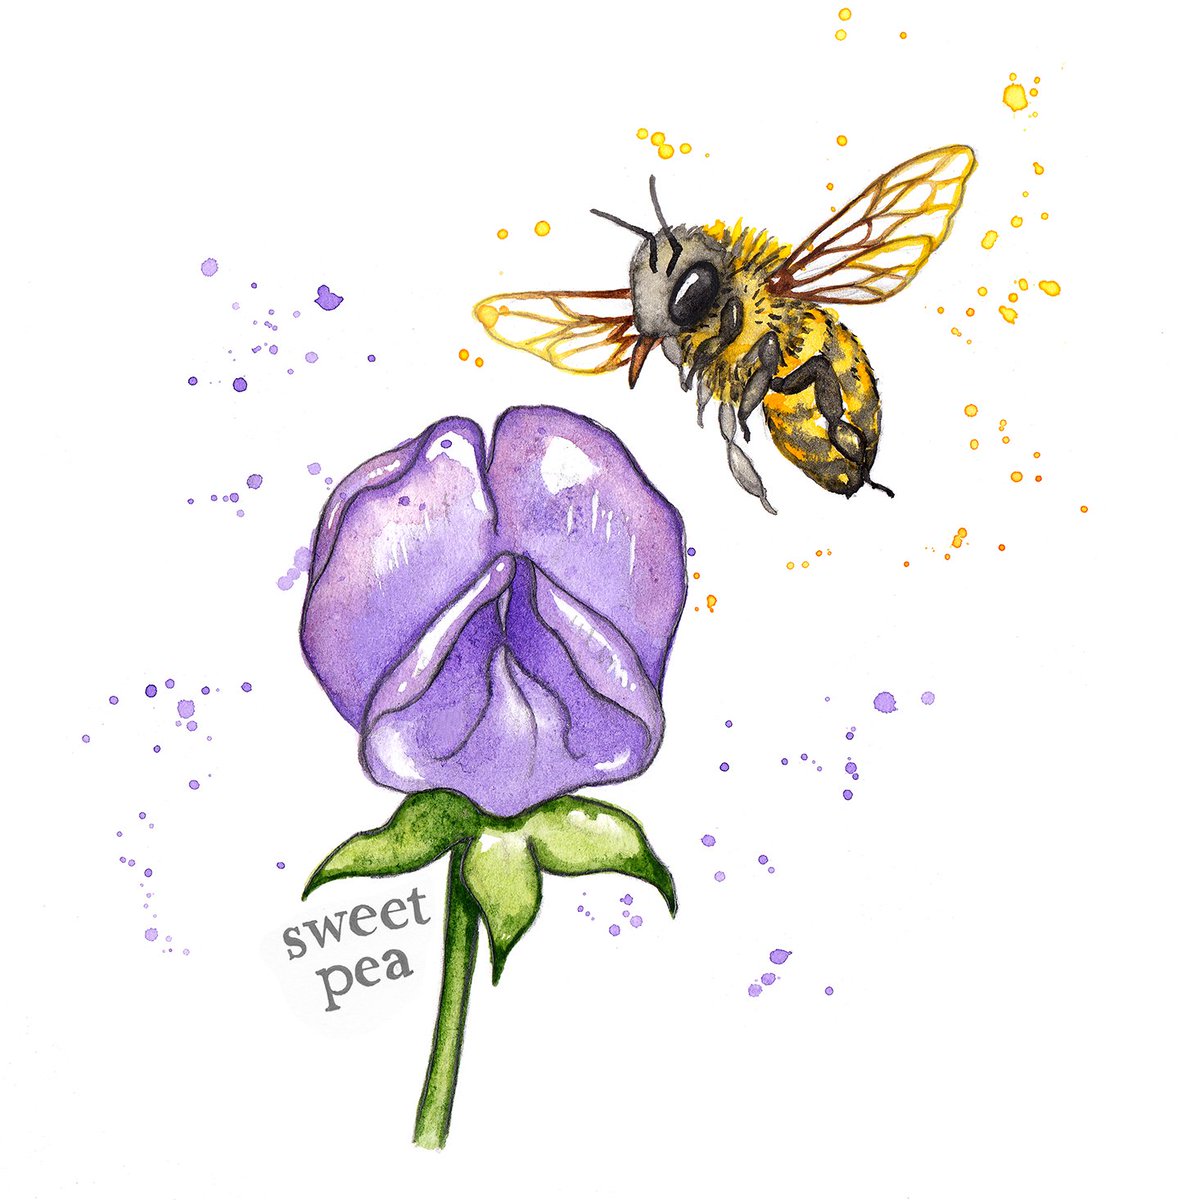 Banned pesticides are banned for a reason...UK bees, if you can read tweets, please stay clear of beet crops this year #saynotoneonics  #banneonicitinoids #savethebees #watercolours #bees #honeybees #illustrationart #illustration